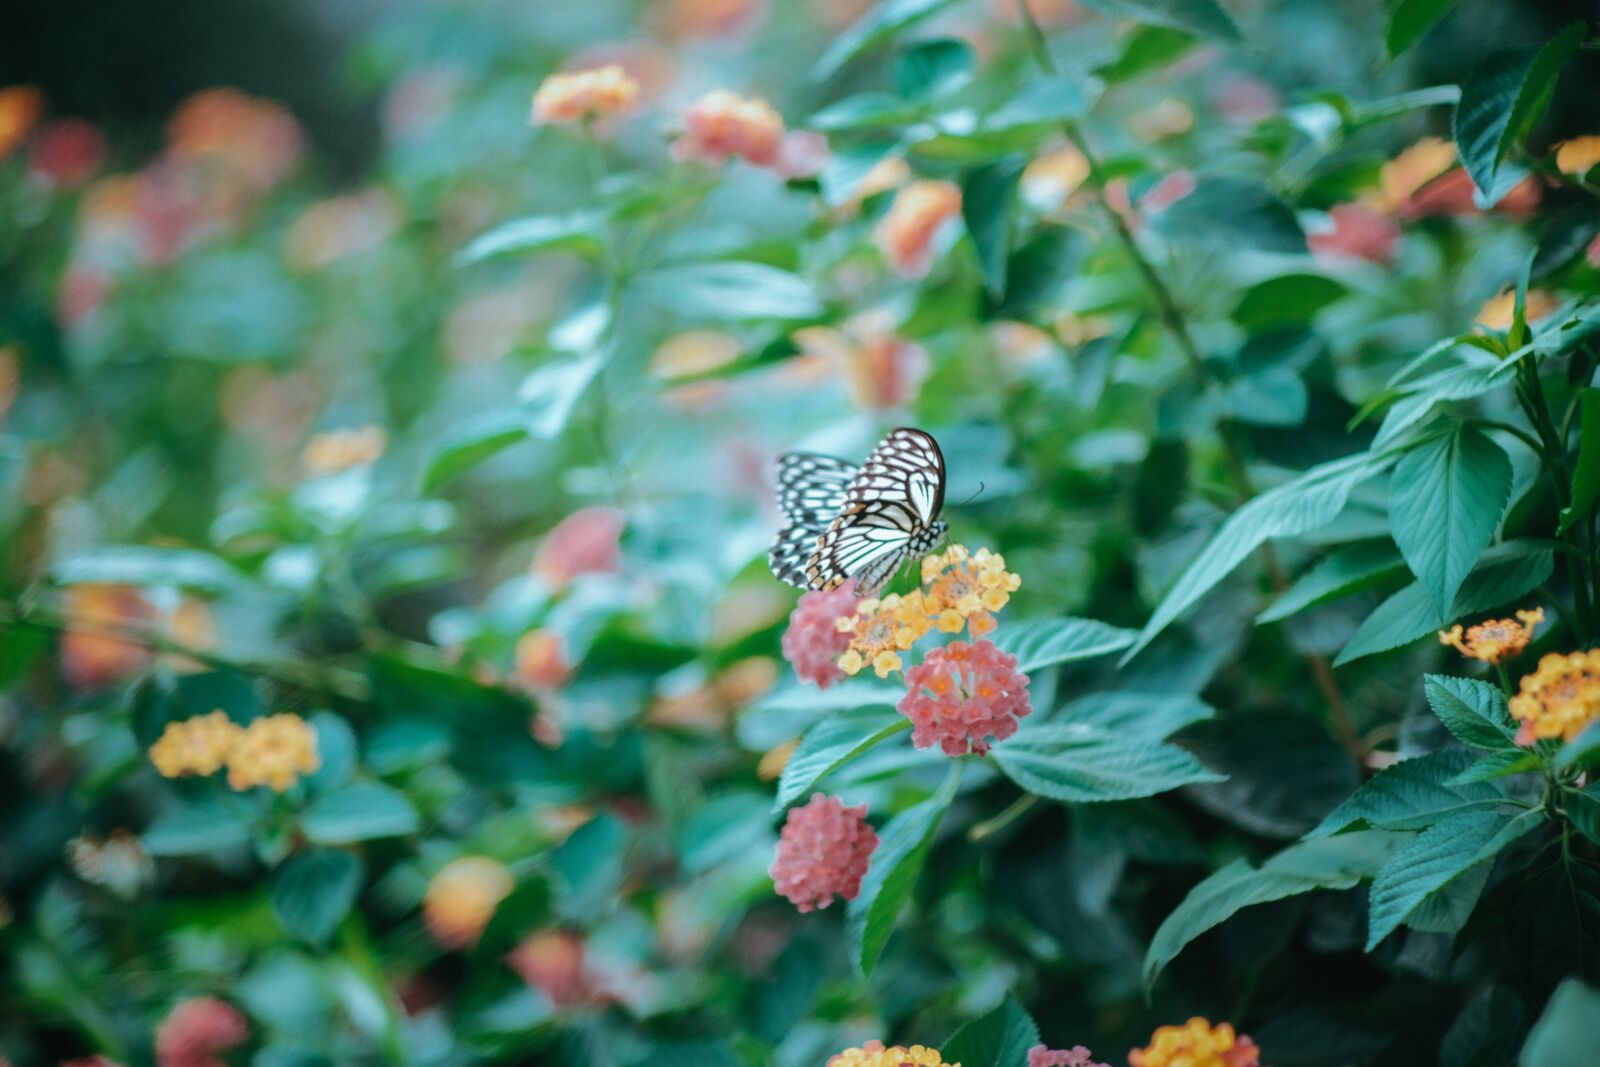 Fujifilm X-T30 sample photo. Butterfly, flower, nature photography